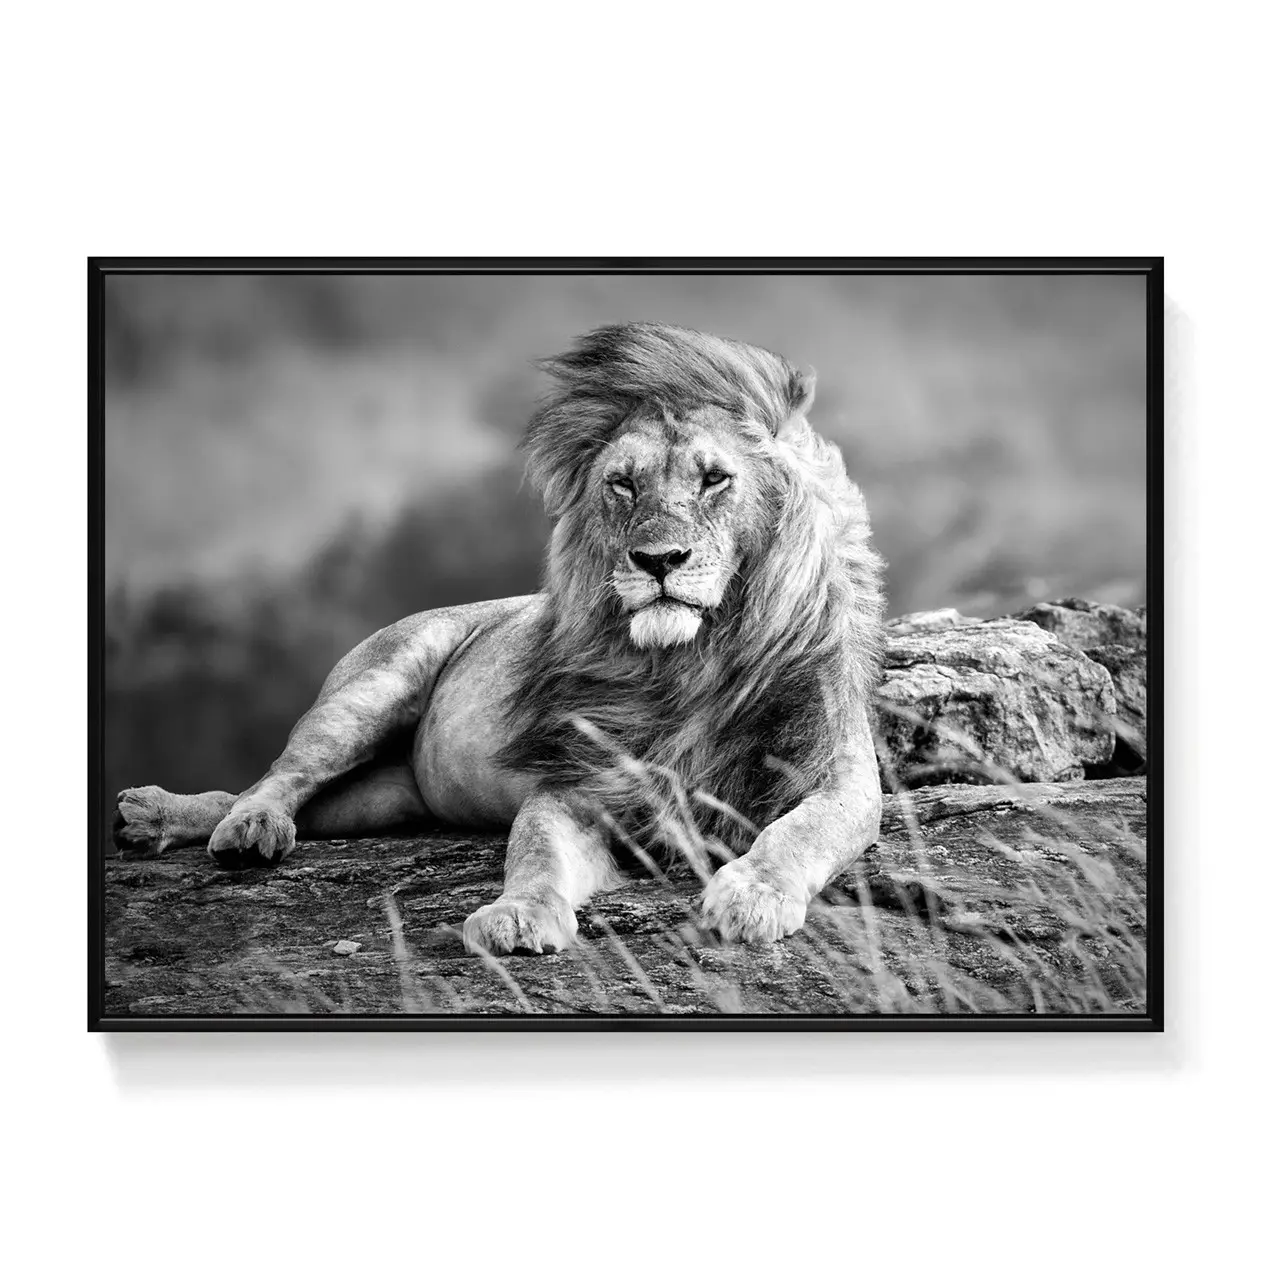 framed pictures for home decor lion painting with frame Printable Safari Lion Photo Bedroom wall art